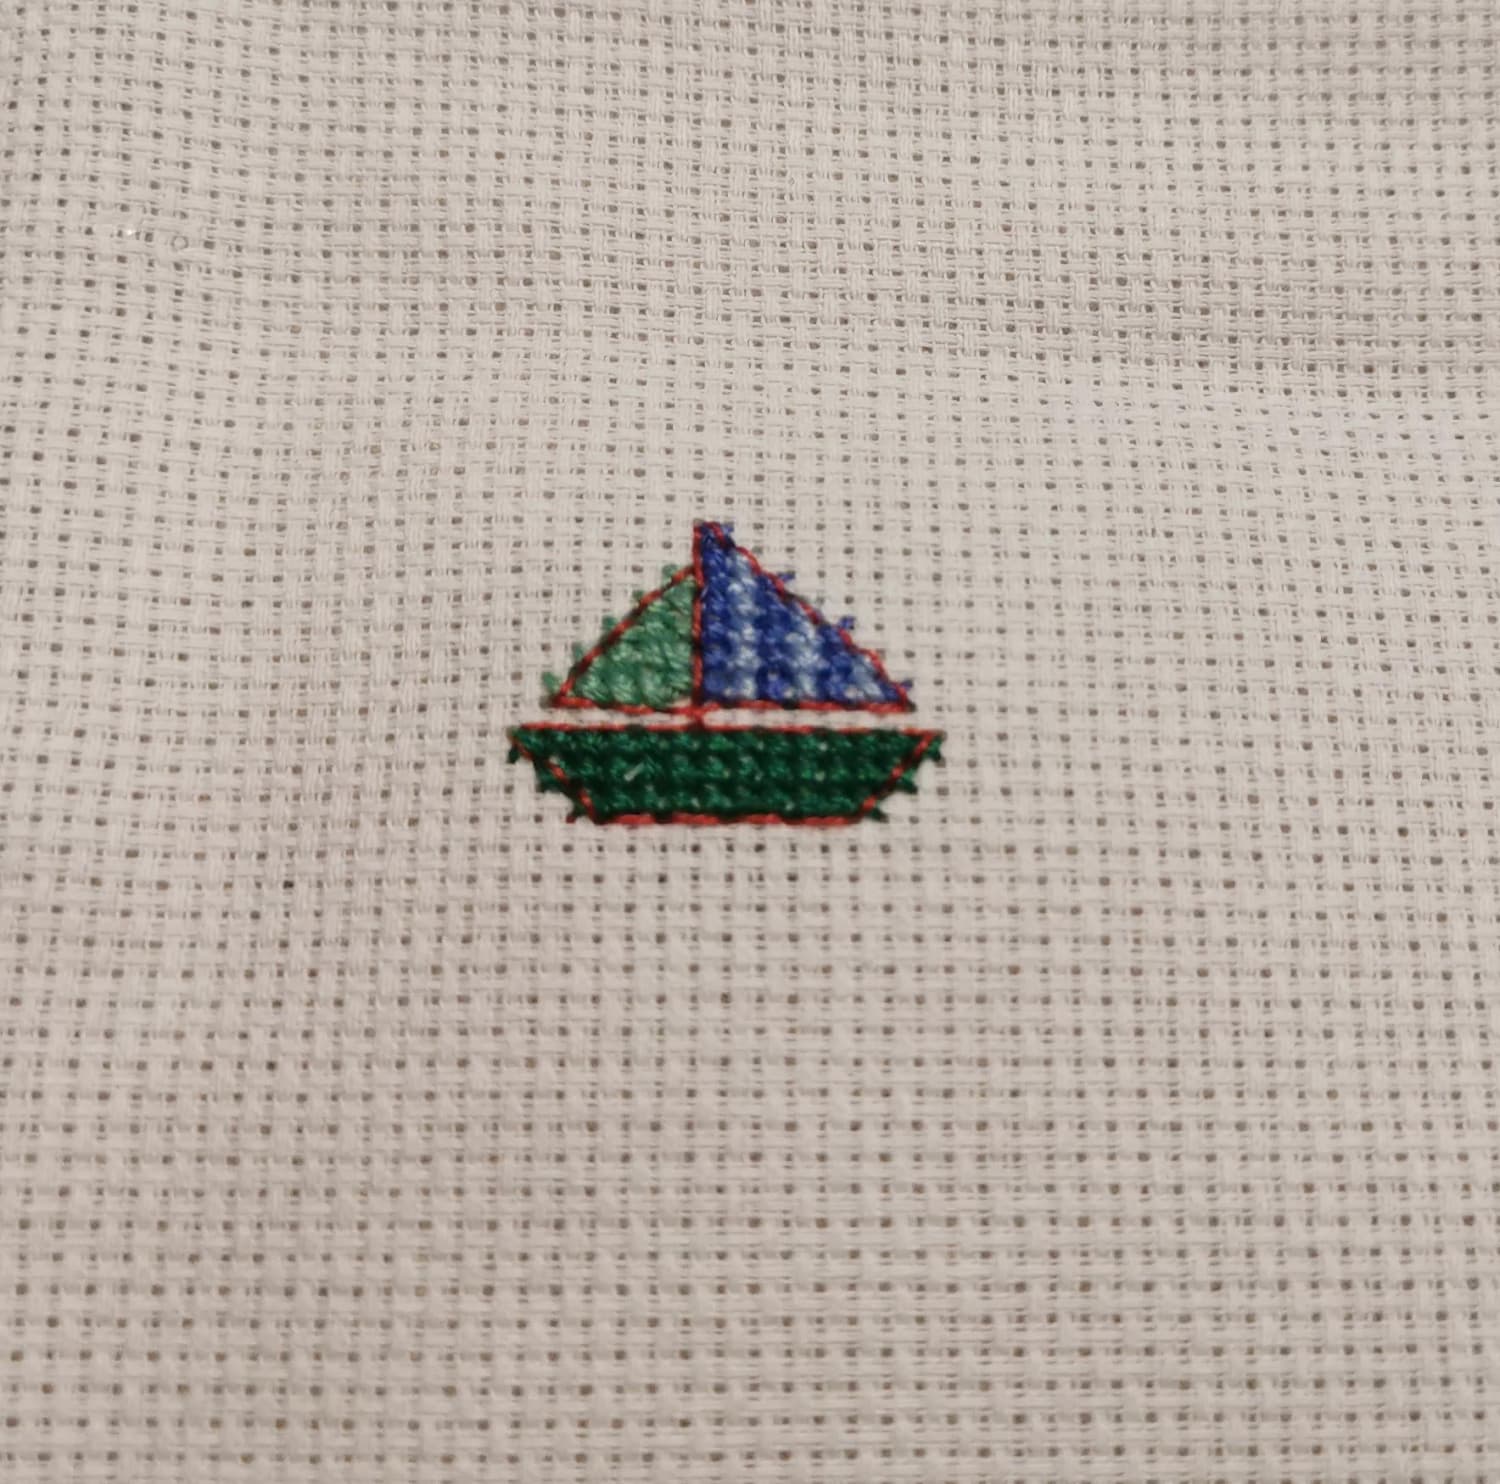 [FO] My 6-year-old son's first fo, I helped with the backstitching and guiding his needle when coming up from the back to the front. Pattern by Maria Diaz